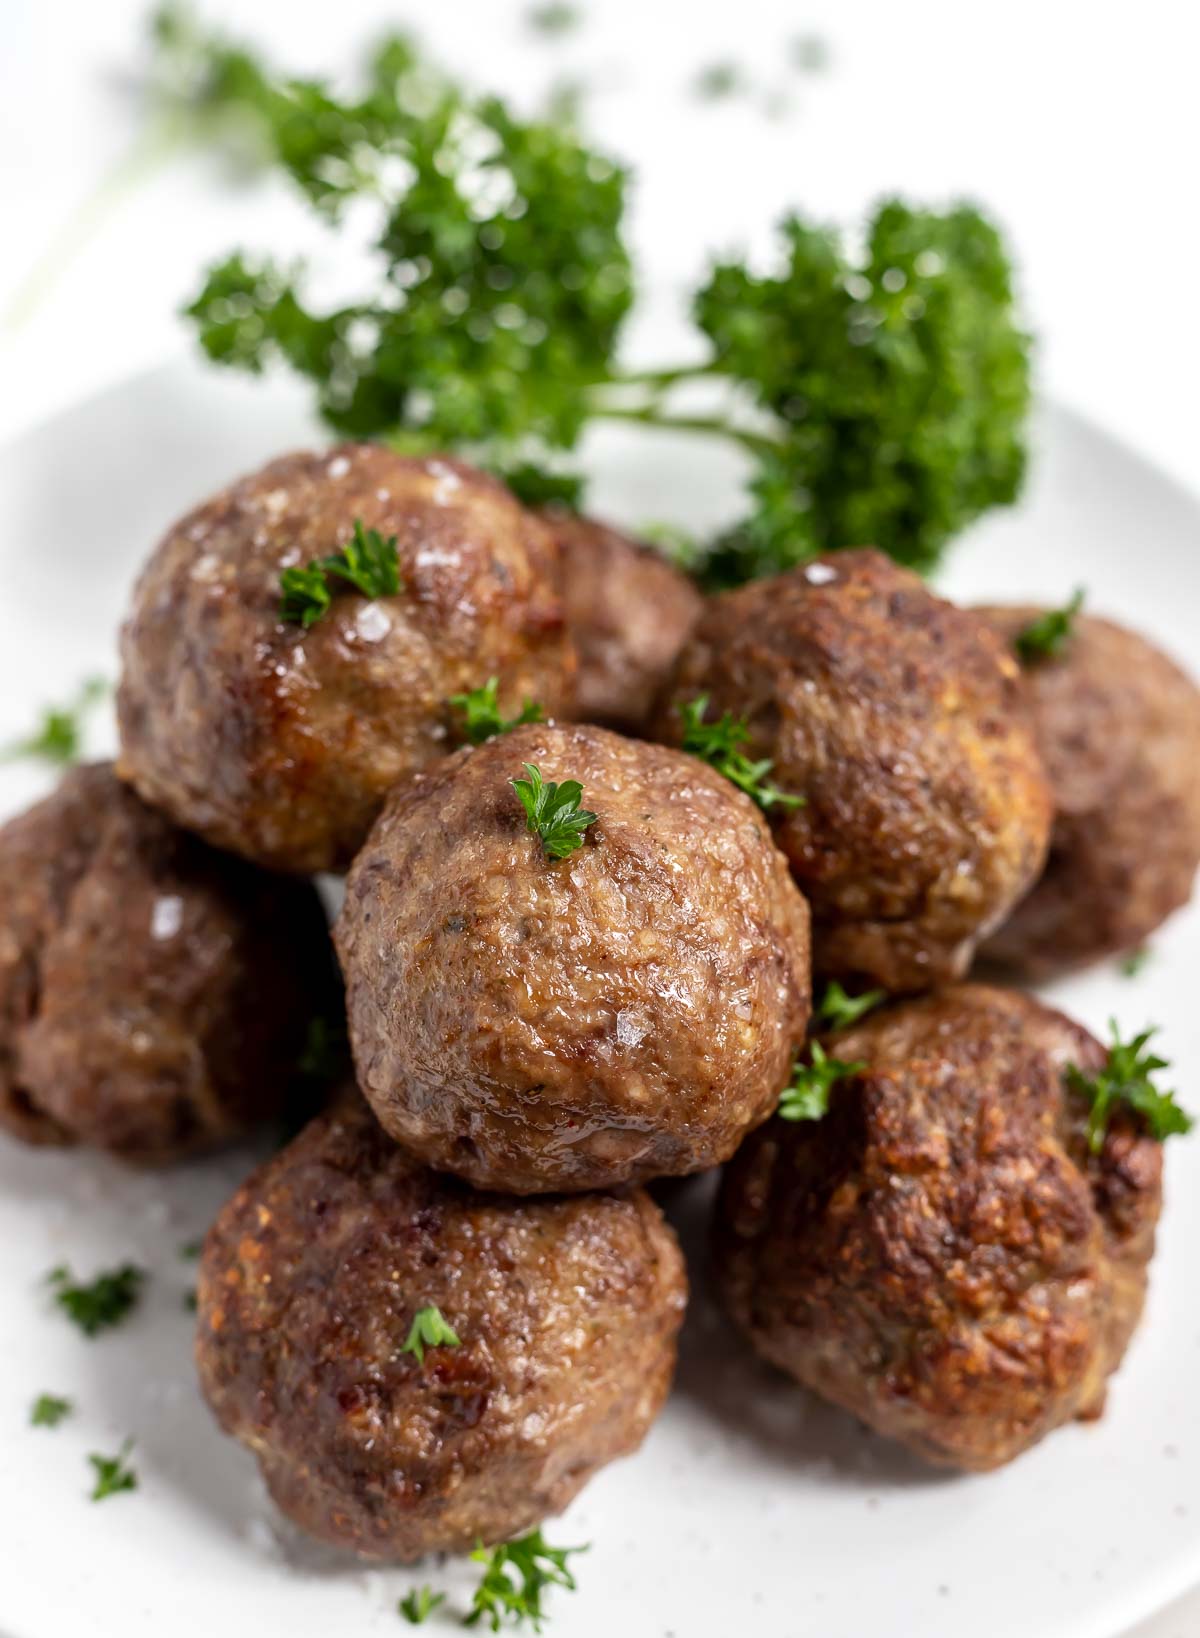 cooked meatballs on white plate with fresh green parsley